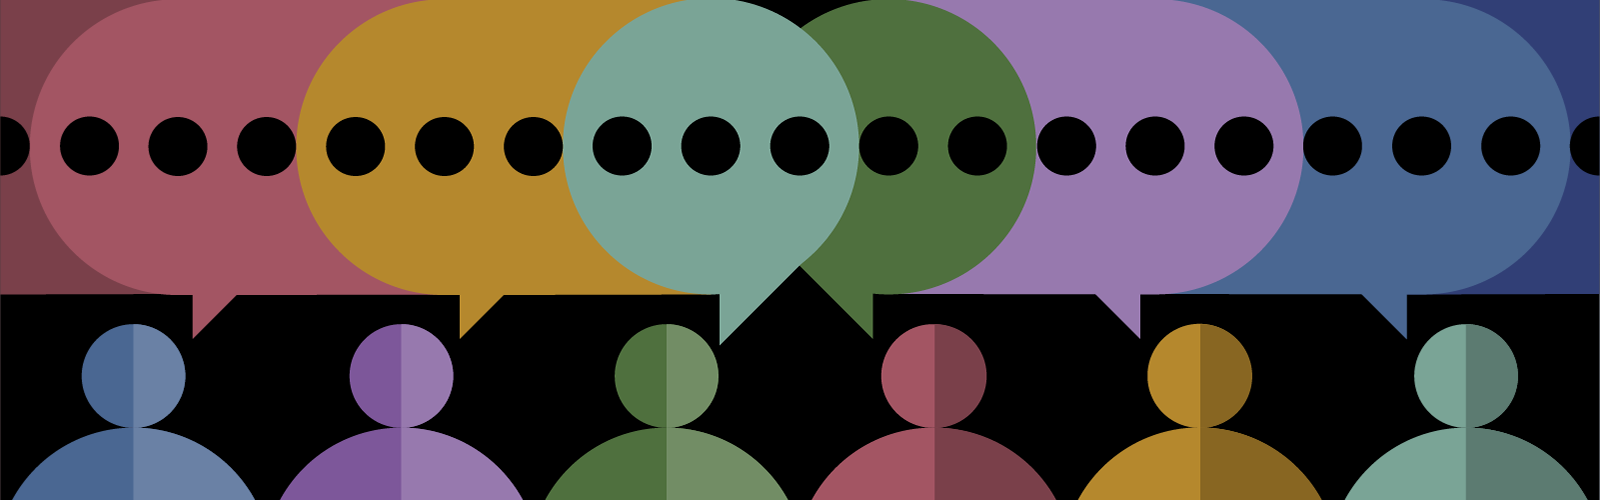 Graphic illustration of six people-shaped figures in different colours producing speech balloons that interconnect and overlap above them.